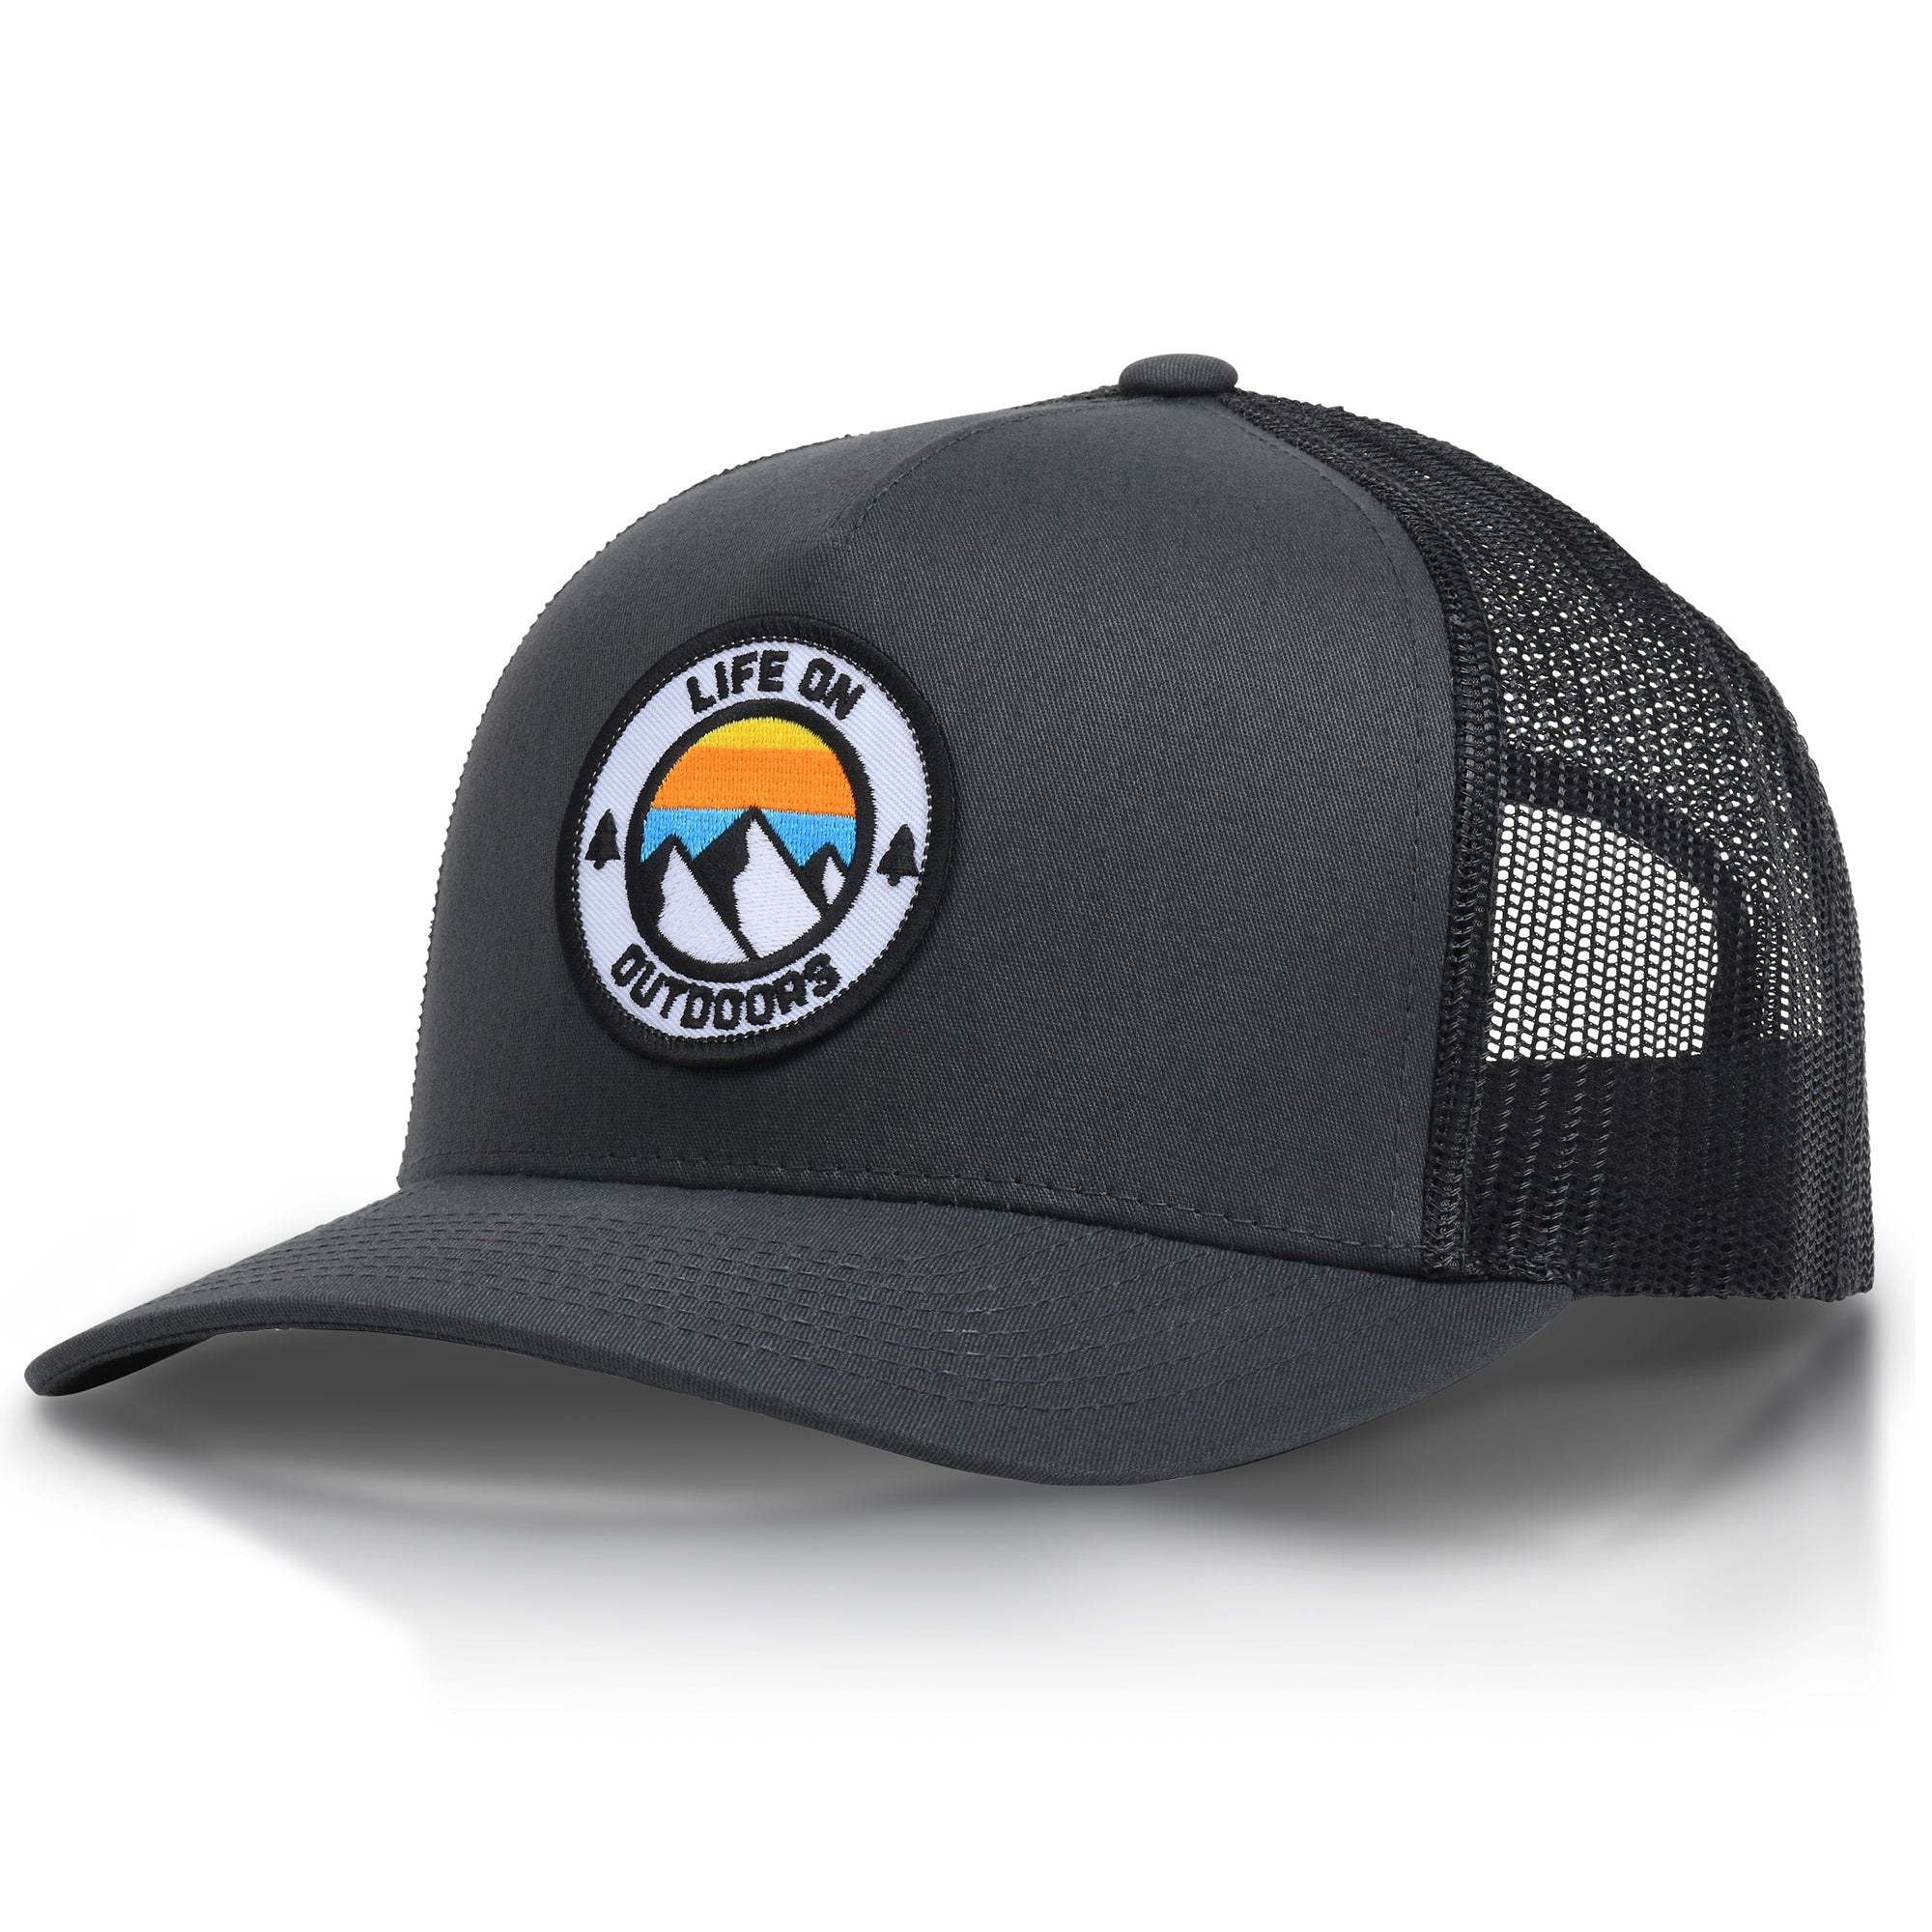 Life On Outdoors Hat Embroidered Icon Patch, Mid-profile Snapback